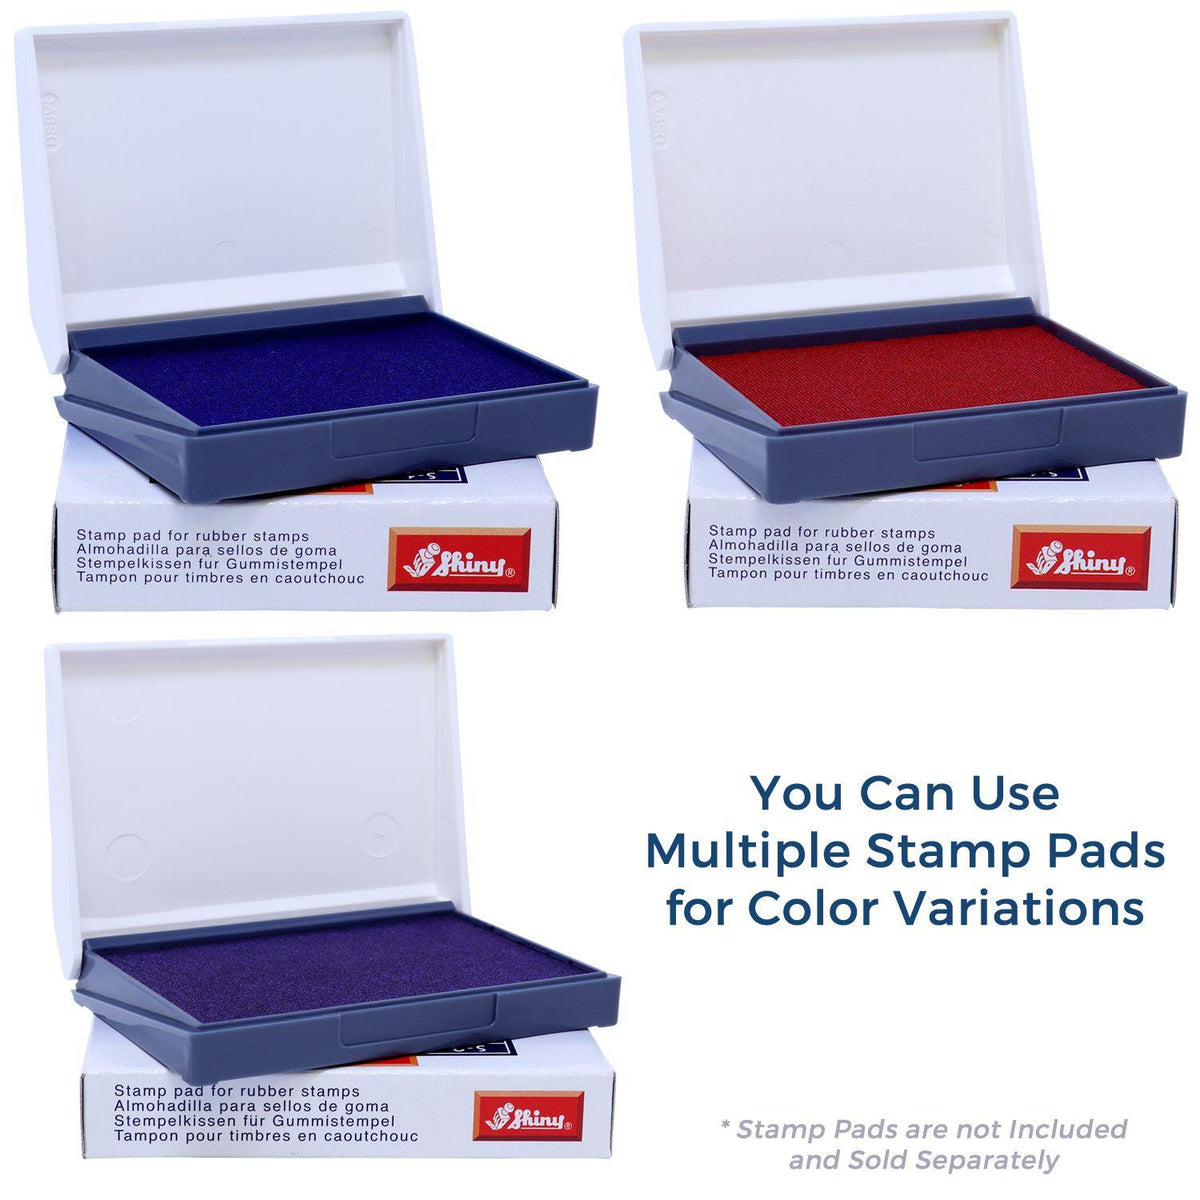 Stamp Pads for Large Client Copy Rubber Stamp Available